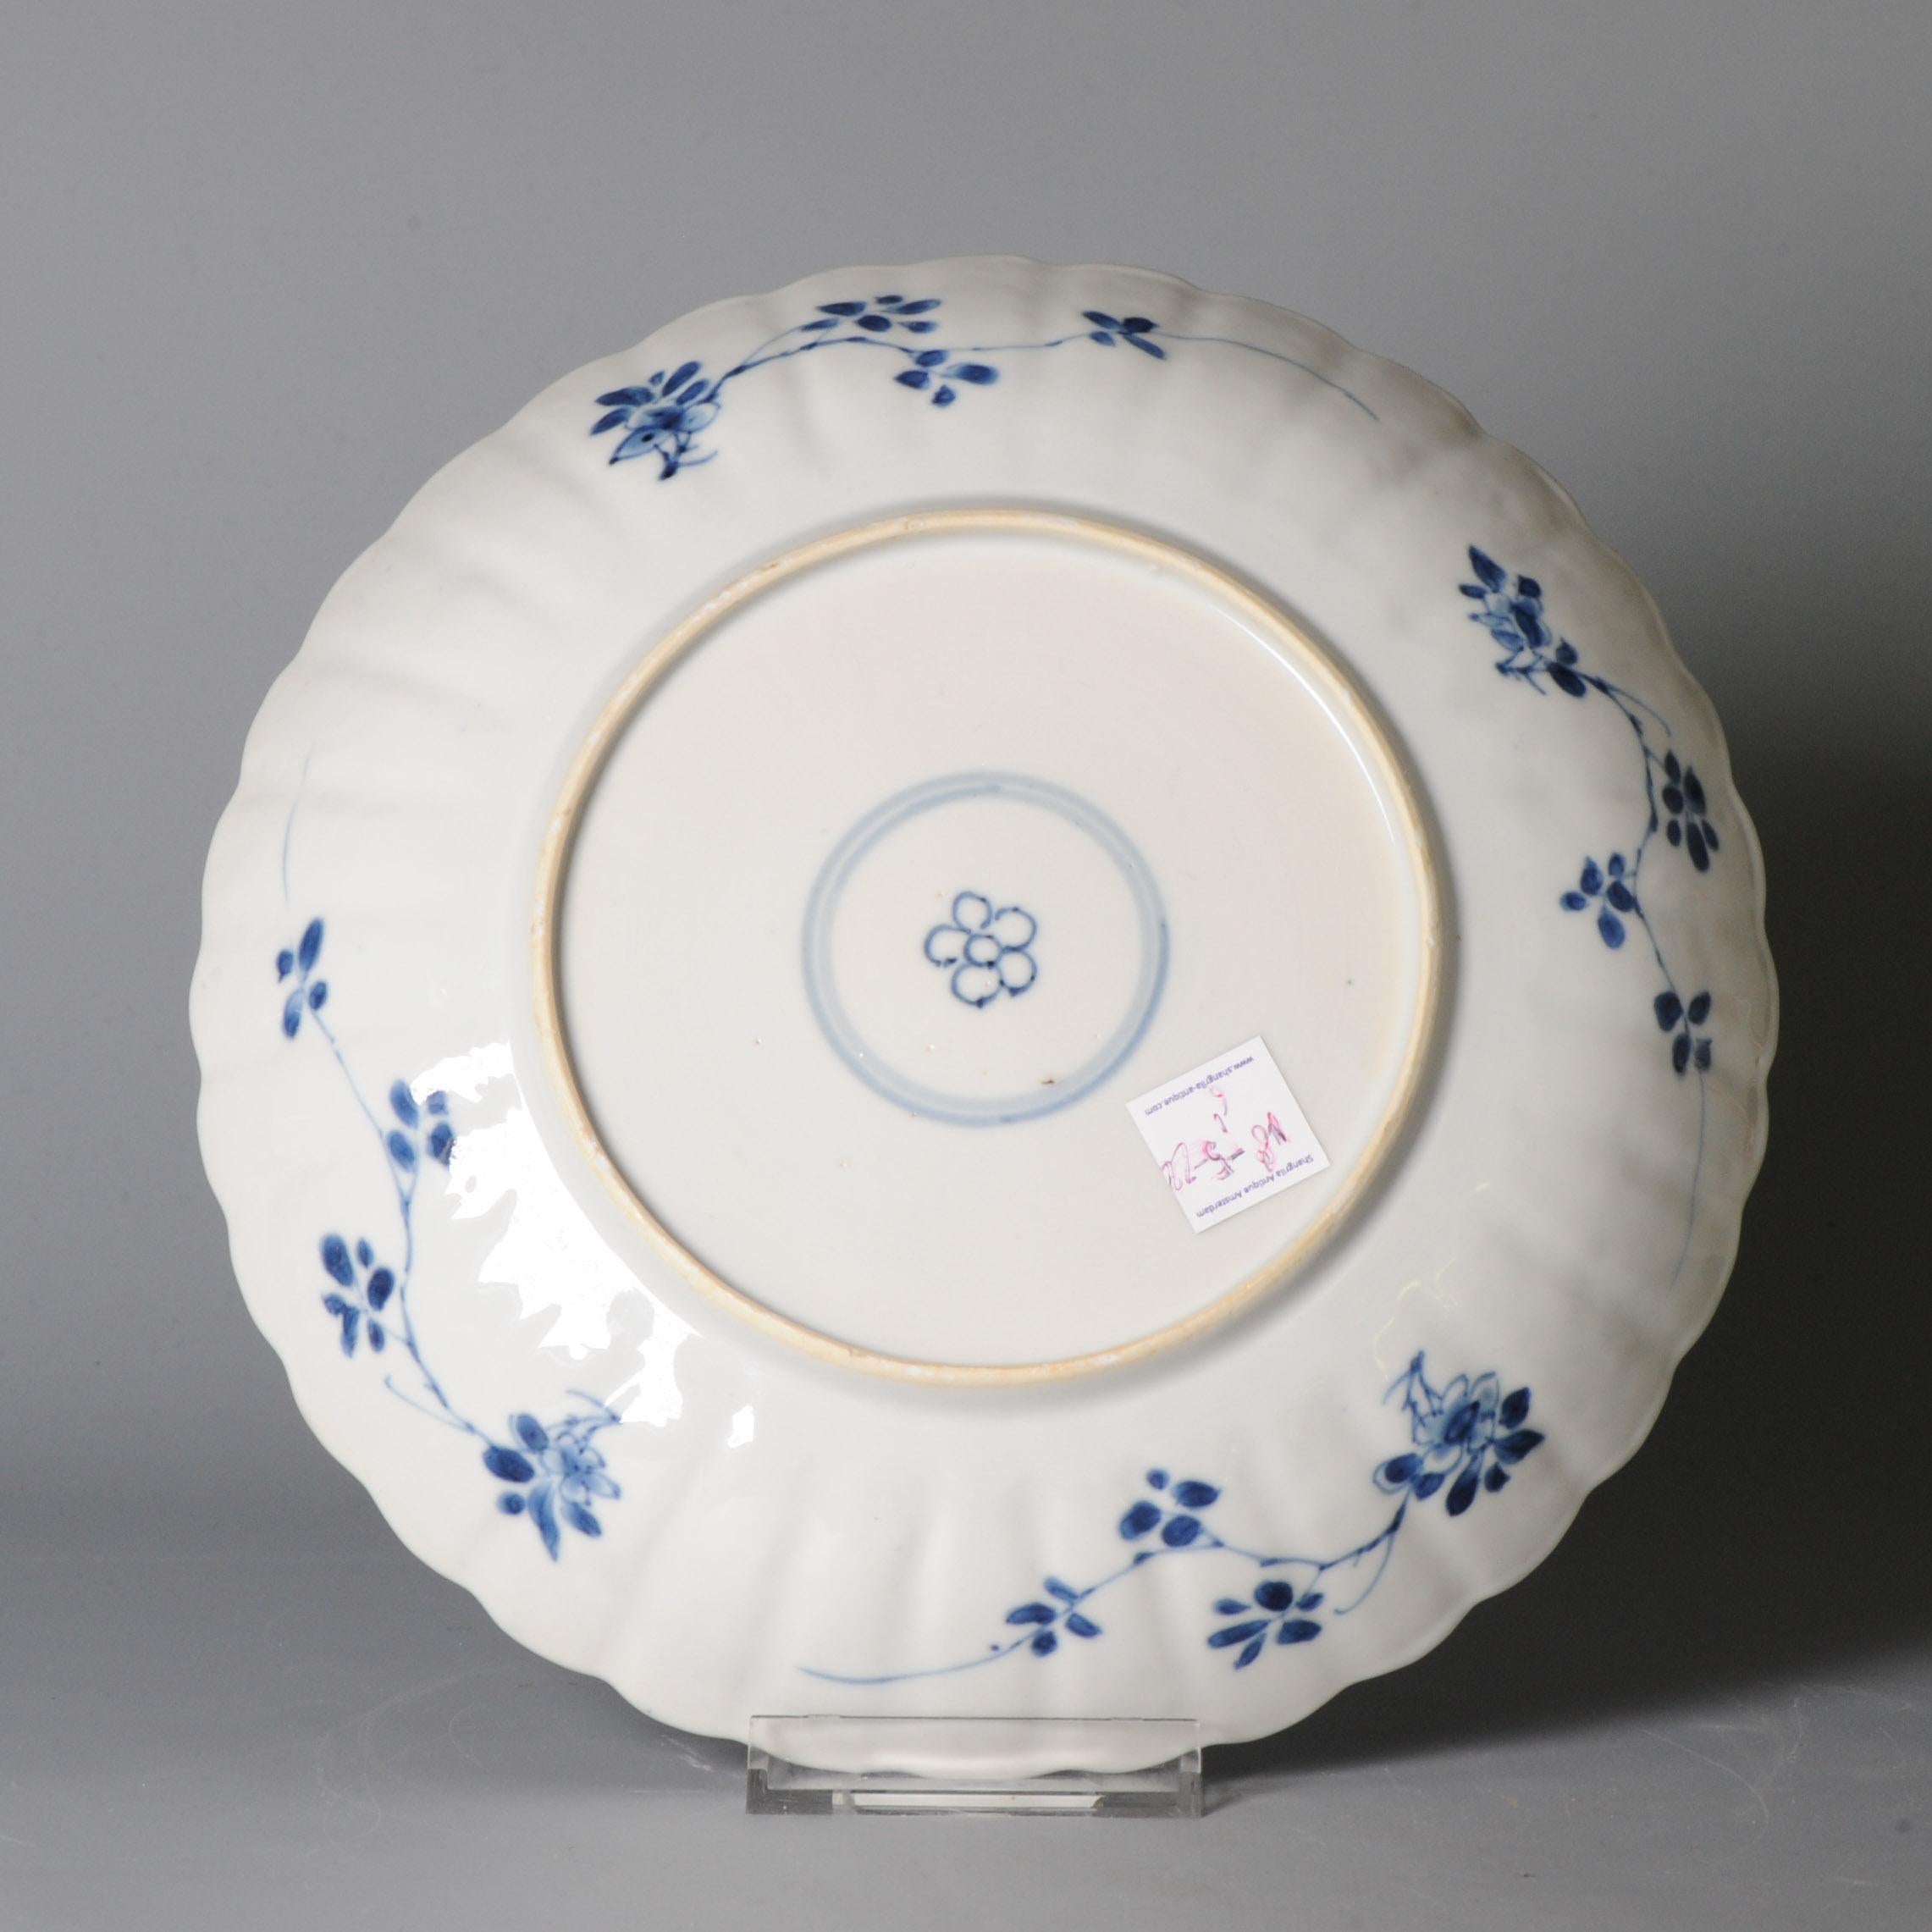 A Rare Kangxi porcelain Blue and White Plates with Bird and floral decoration 2